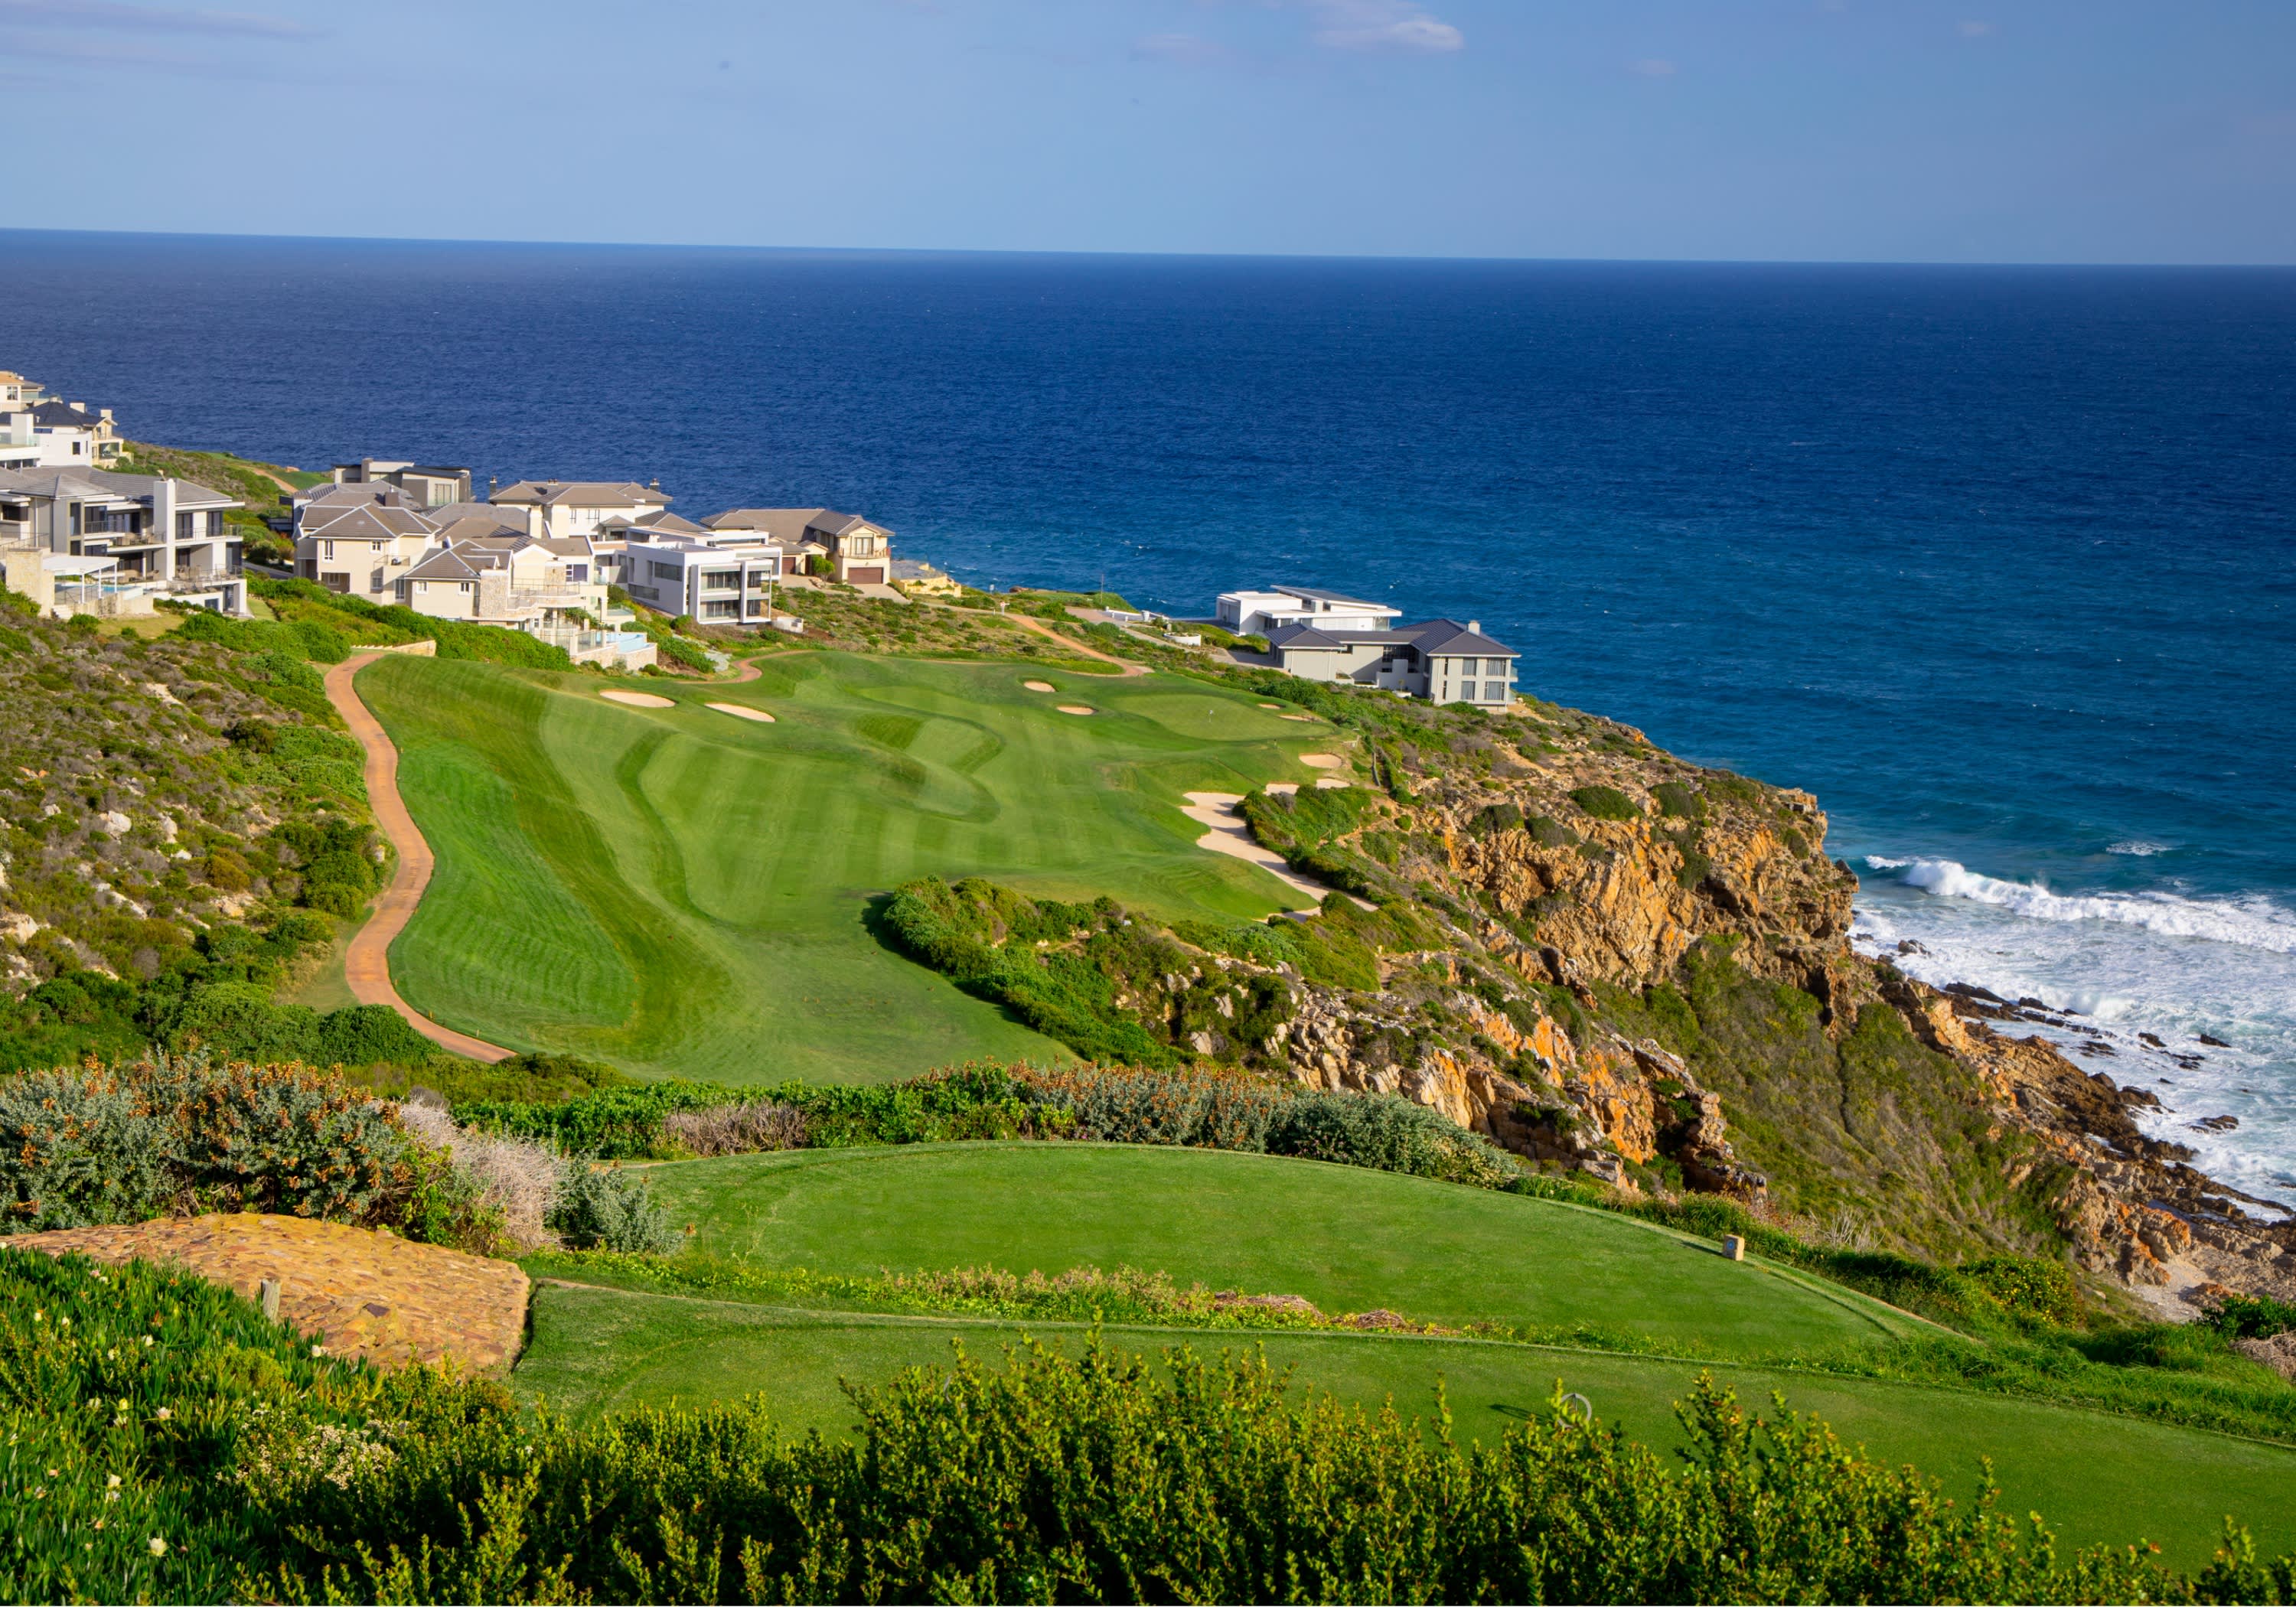 GOLF TOUR - 4 Ball + Carts at PINNACLE POINT GOLF COURSE + 2 Night Stay for 4 at HARTENBOS RIVER LODGE in Mossel Bay!